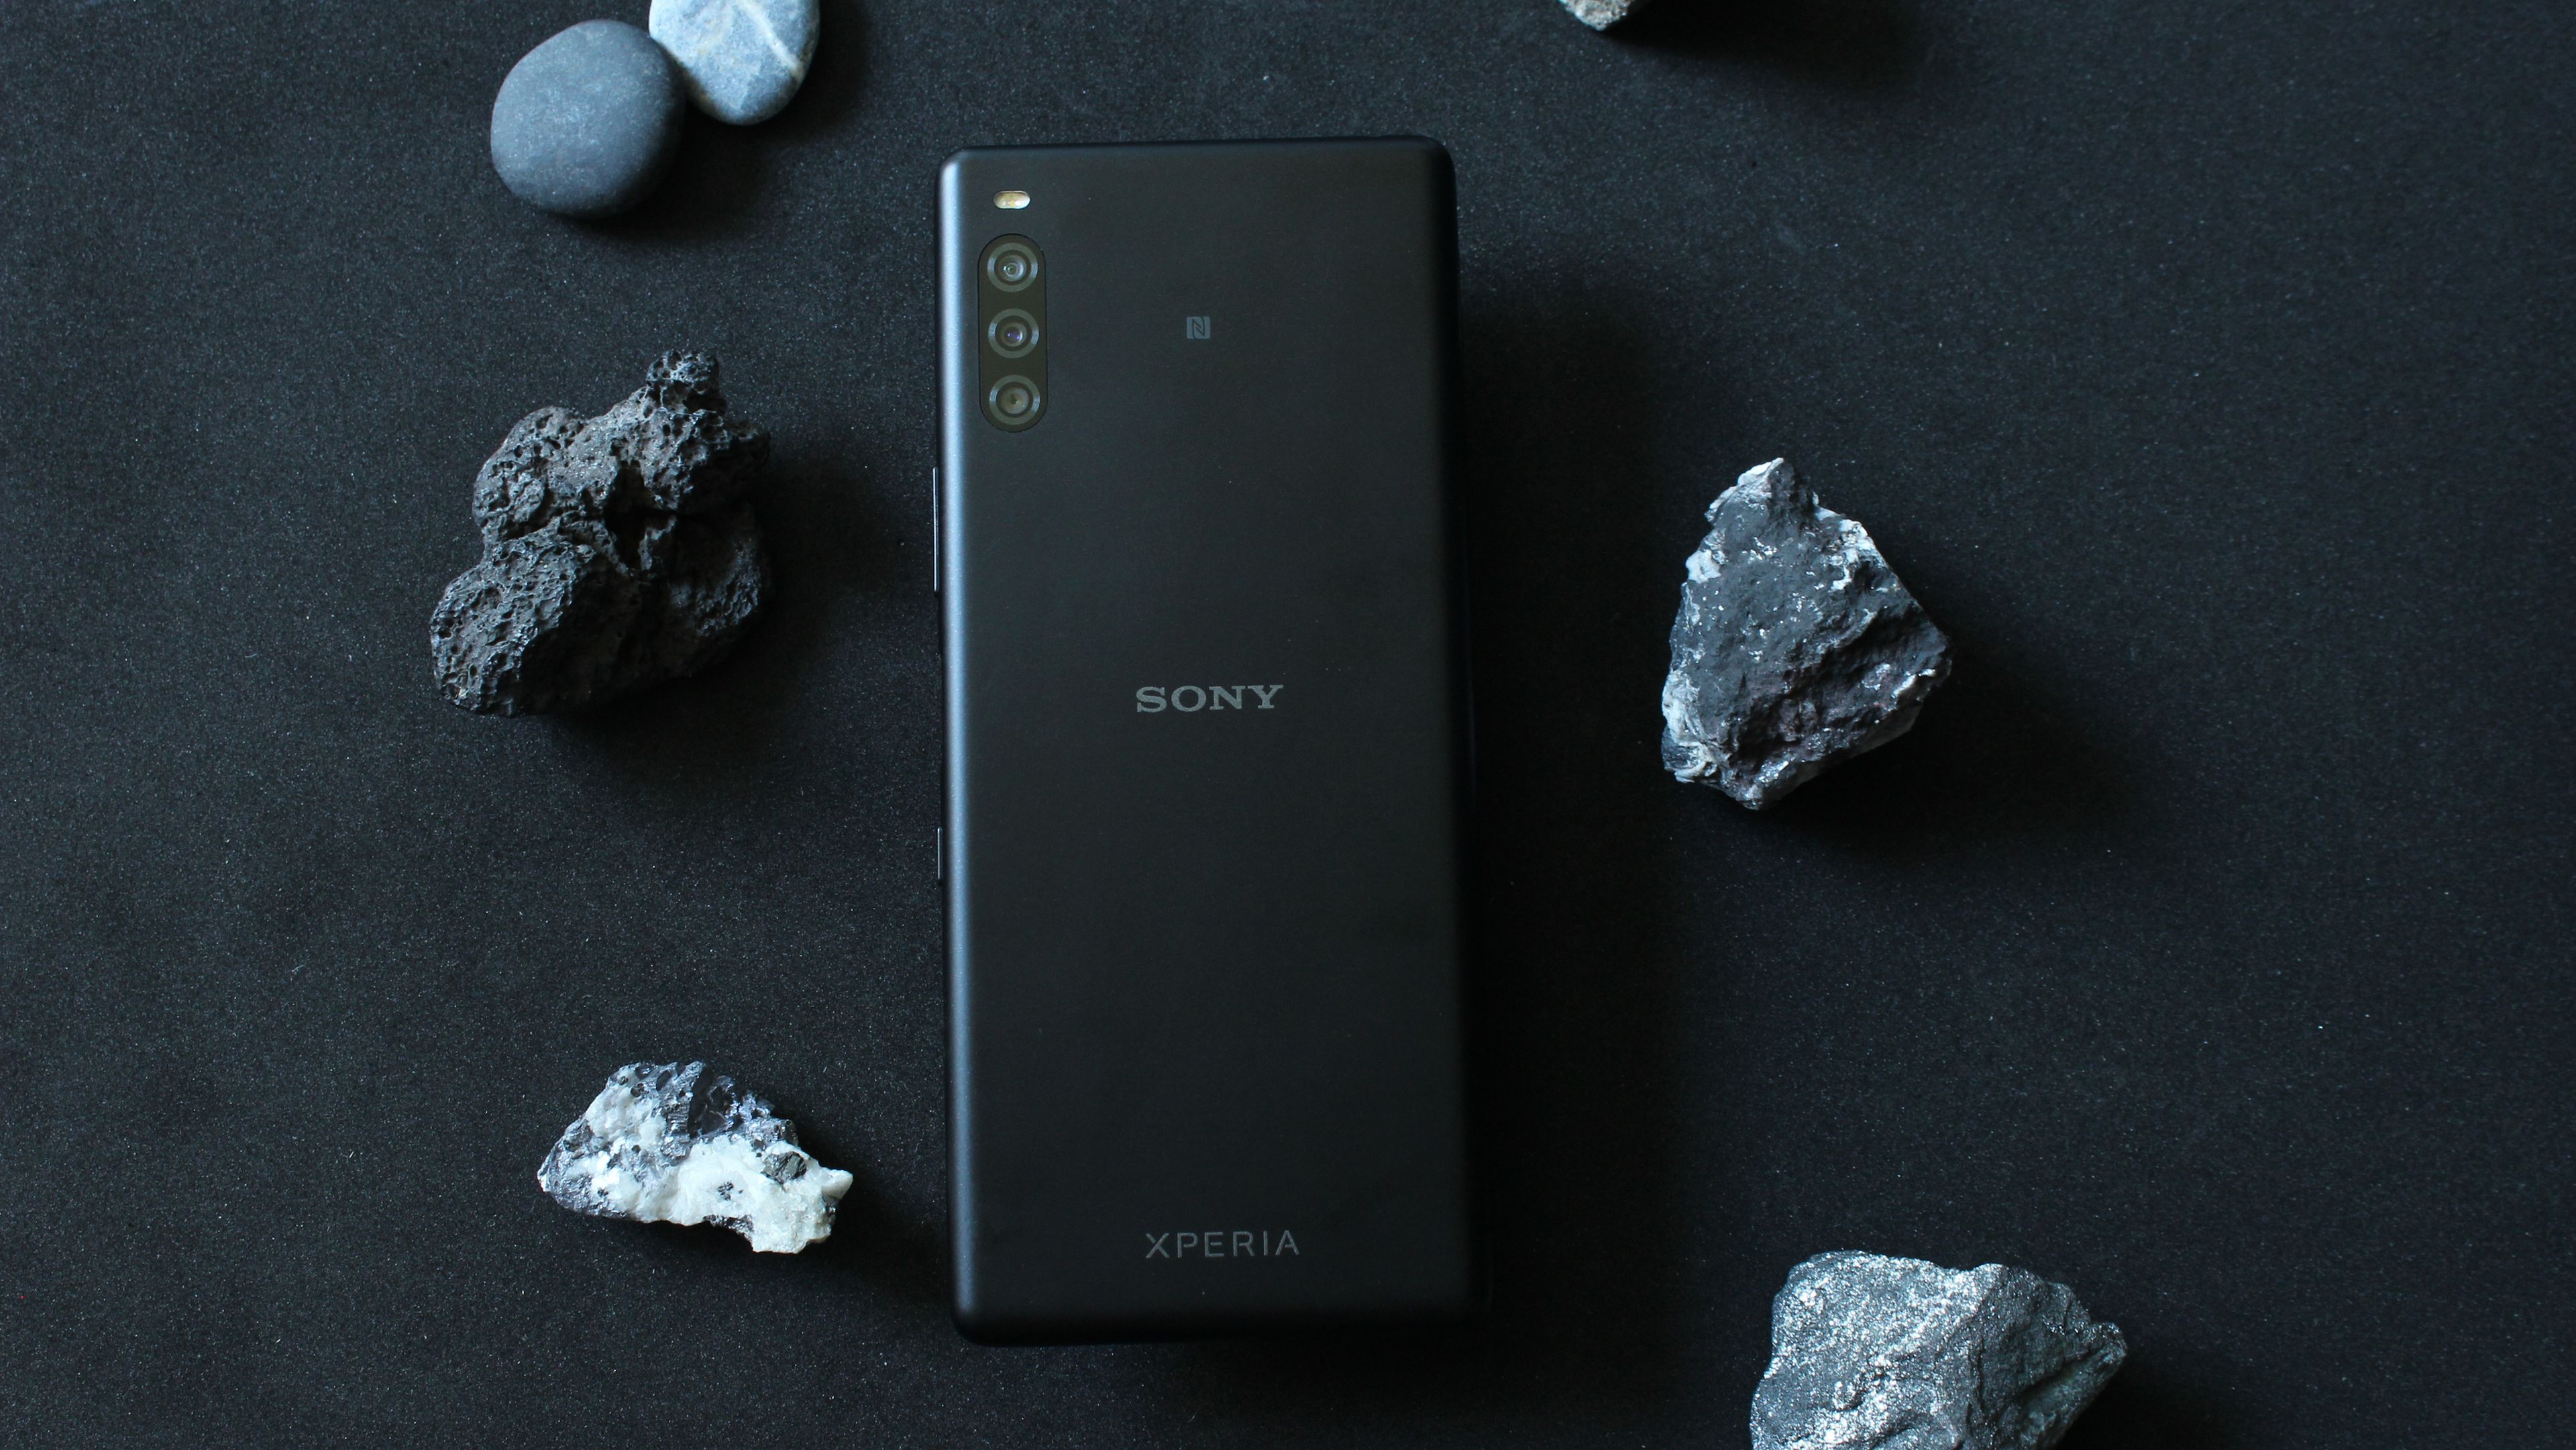 Sony Xperial L4